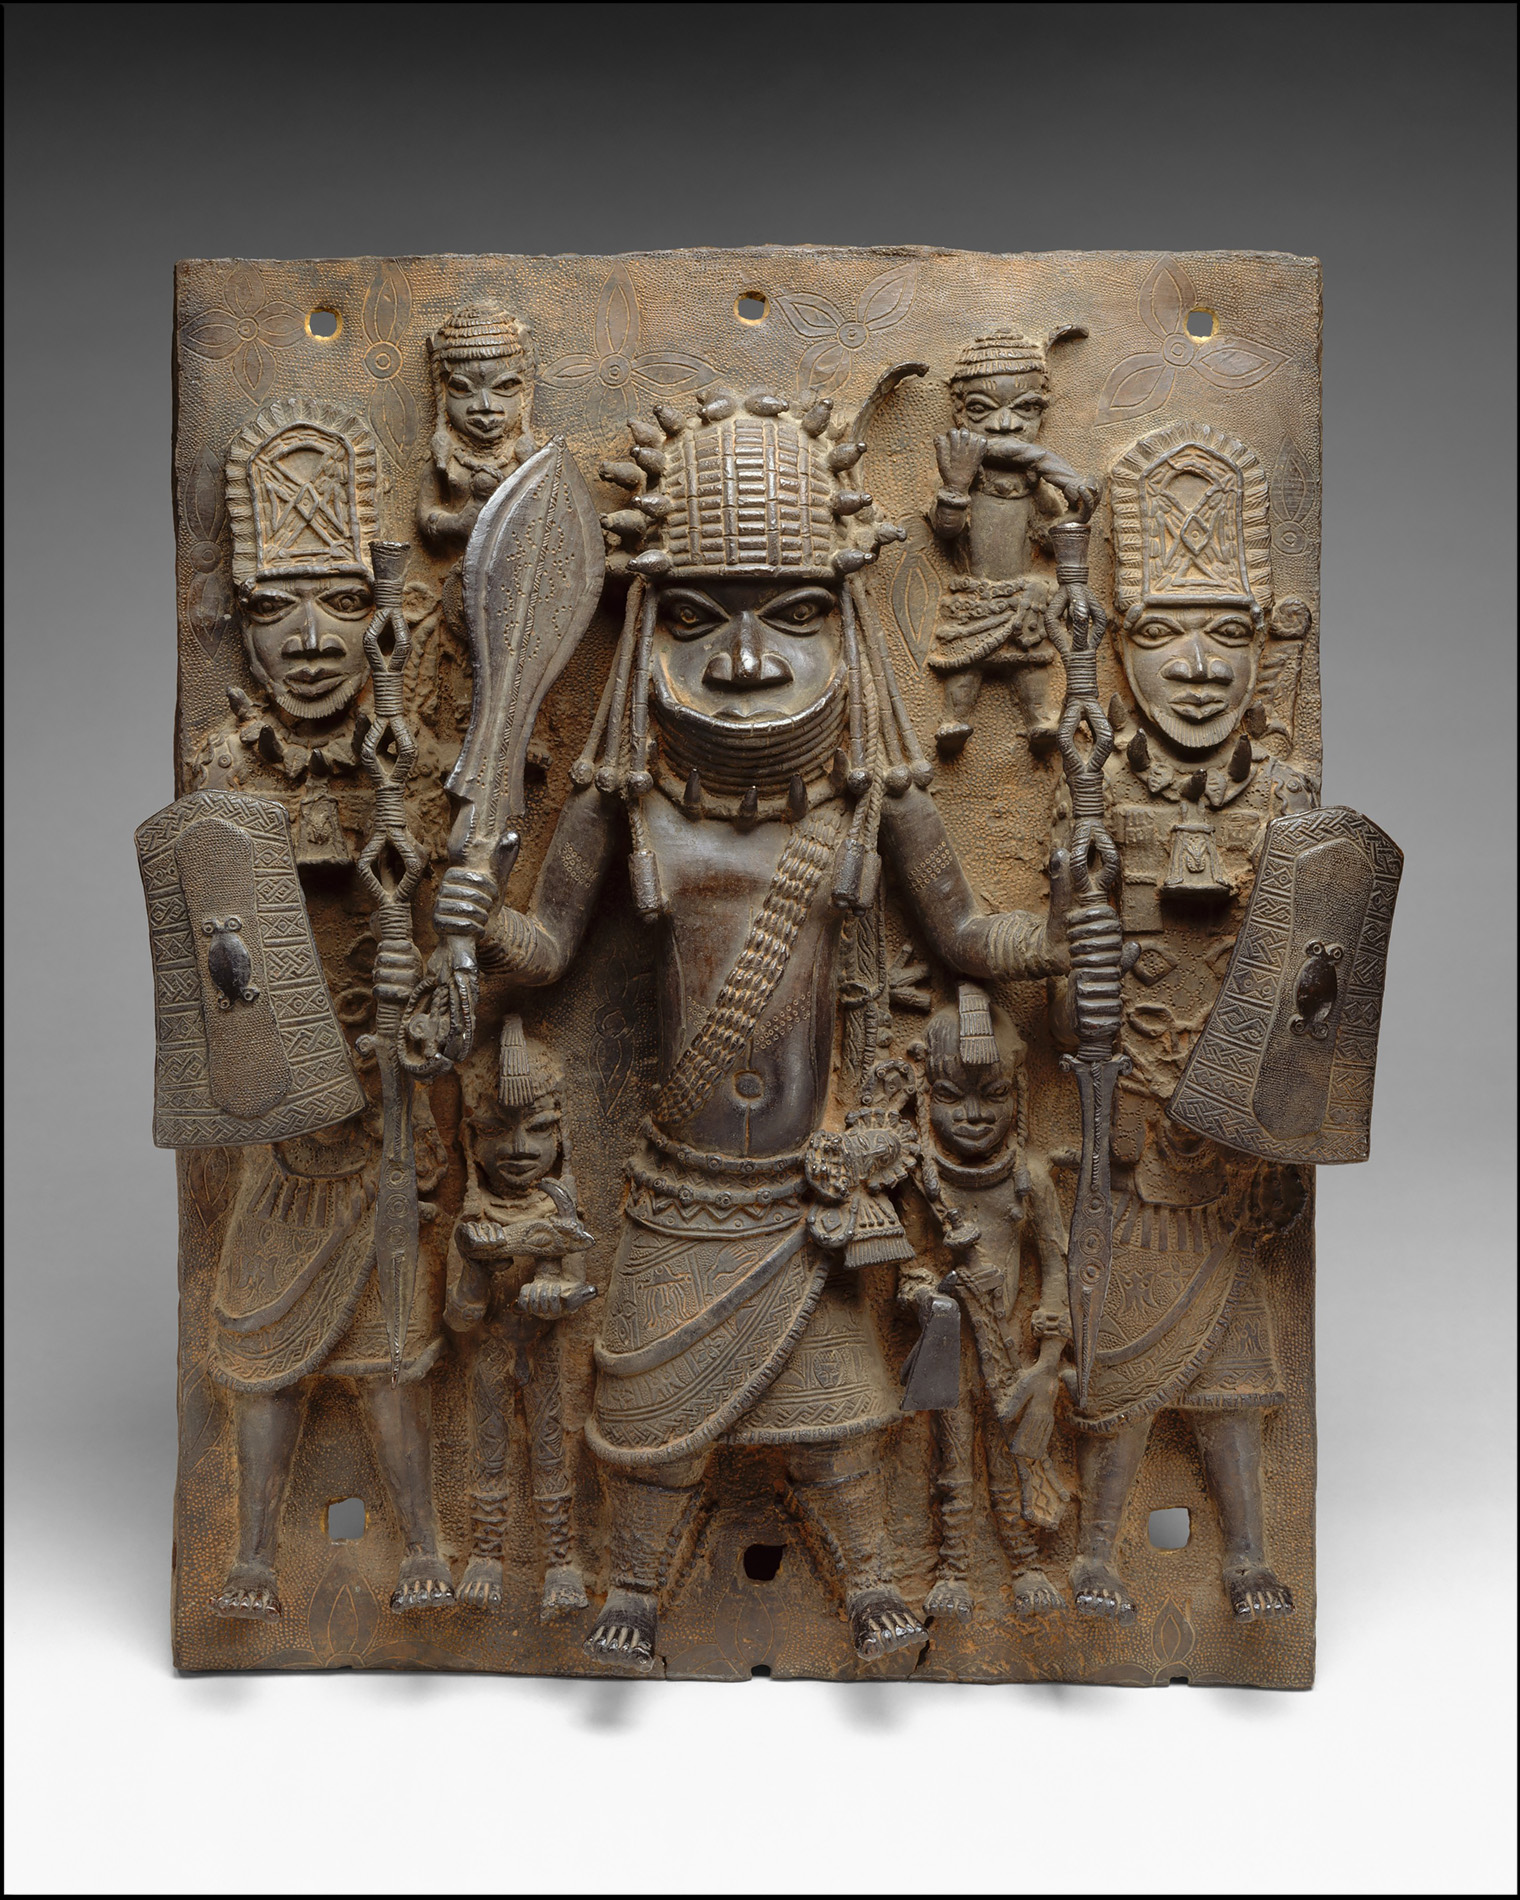 Warrior and Attendants | 16th century West African bronze plaque from the royal palace in Benin City | Metropolitan Museum of Art